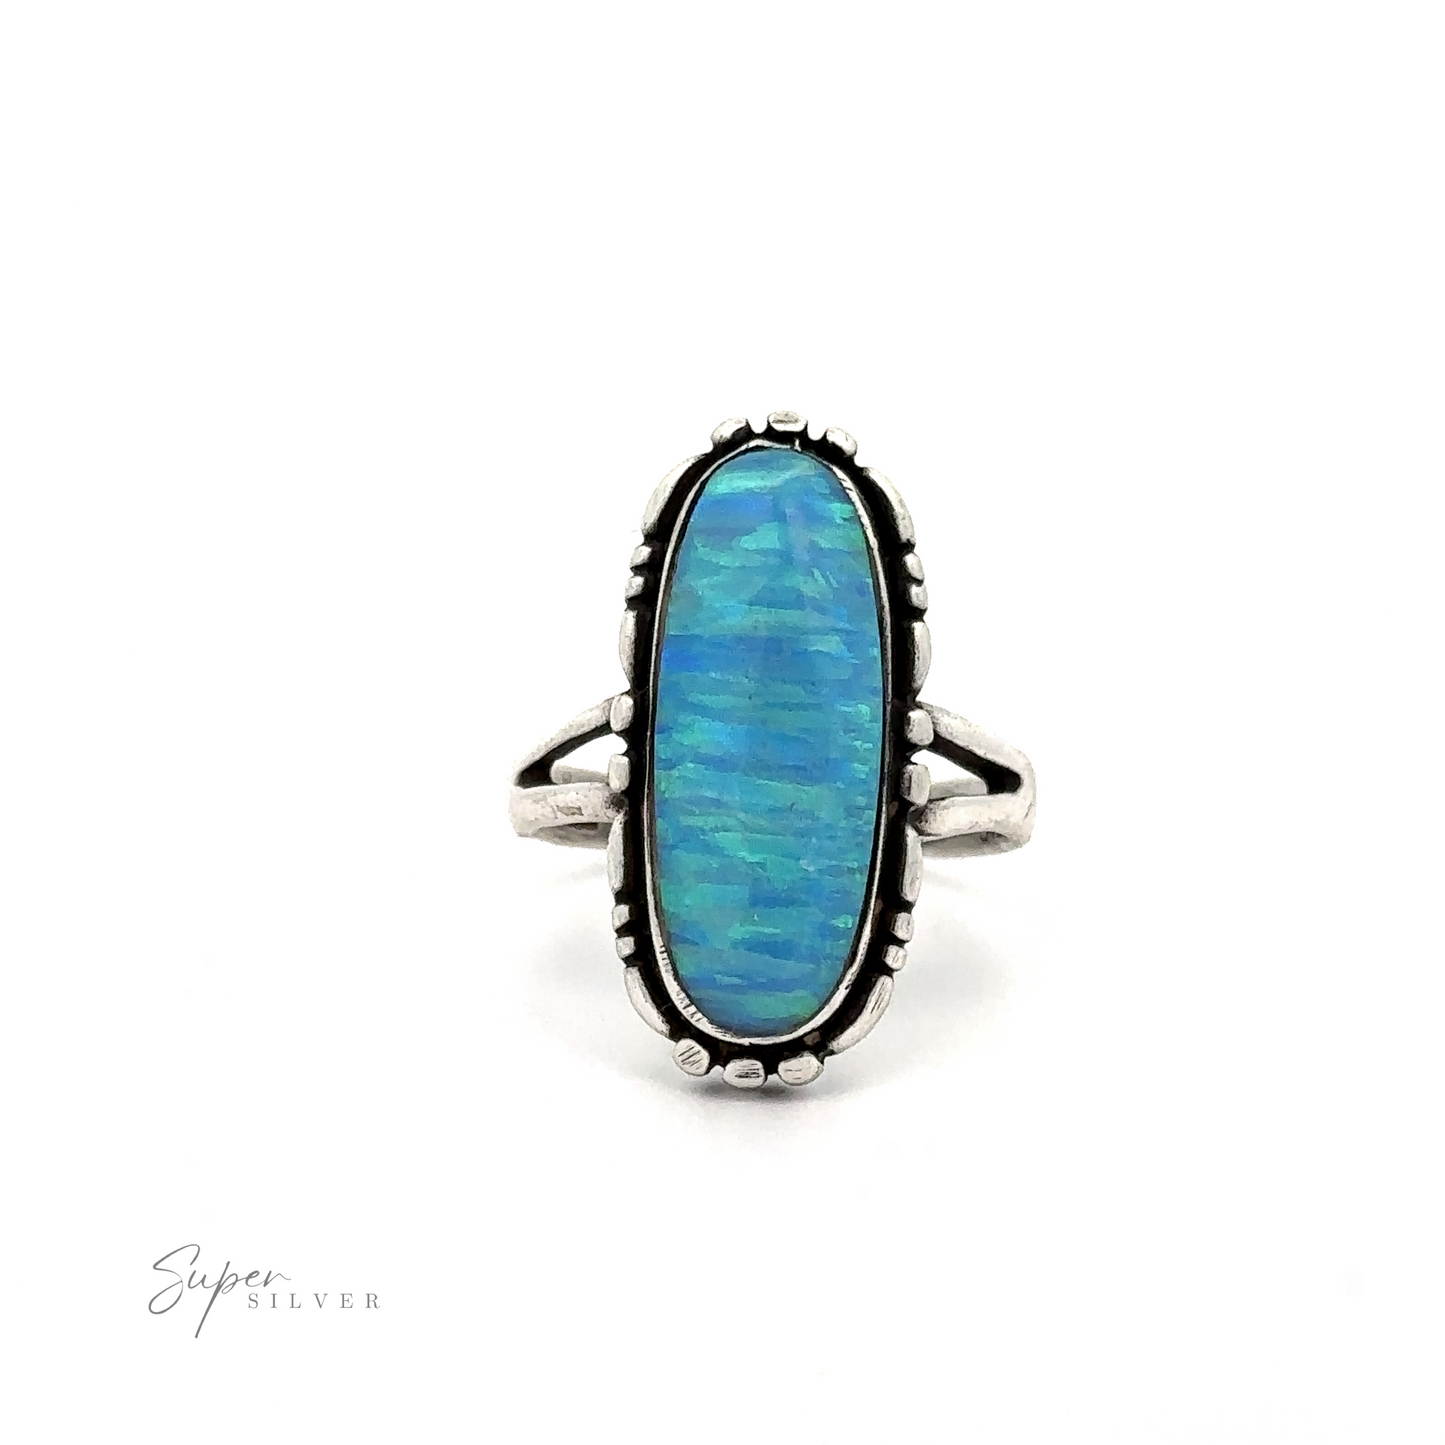 
                  
                    A sterling silver ring with an oval-shaped, lab-created blue opal stone featuring an iridescent pattern. The Southwestern-styled band and setting add intricate detail. The brand logo "American Made Oval Opal Ring" is seen in the bottom-left corner.
                  
                